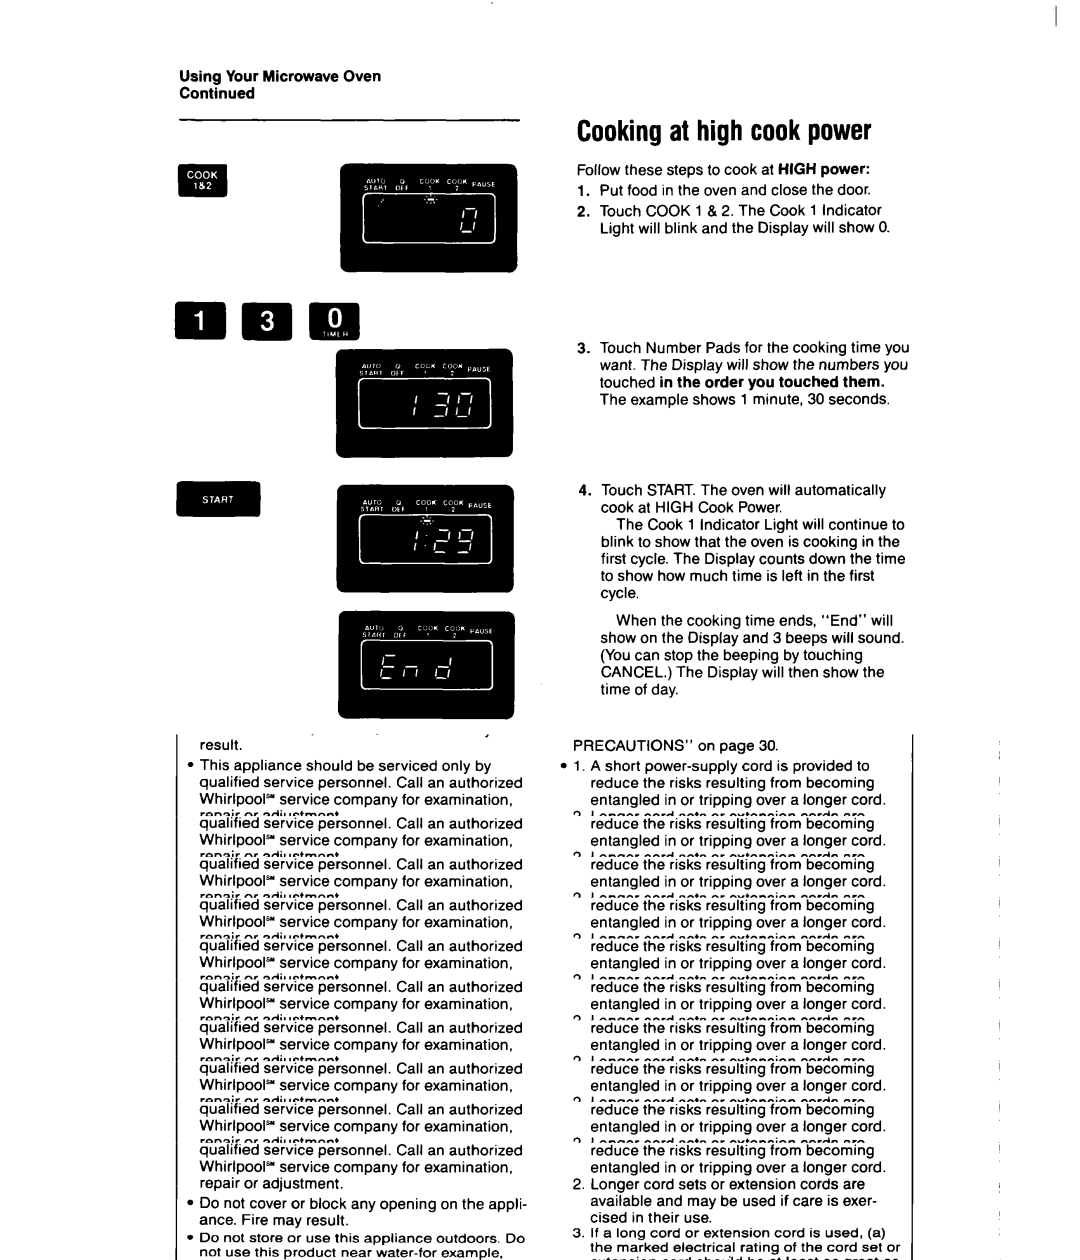 Whirlpool MSI040XY, MSI065XY user manual Cookingat high cook power, Example shows 1 minute, 30 seconds 